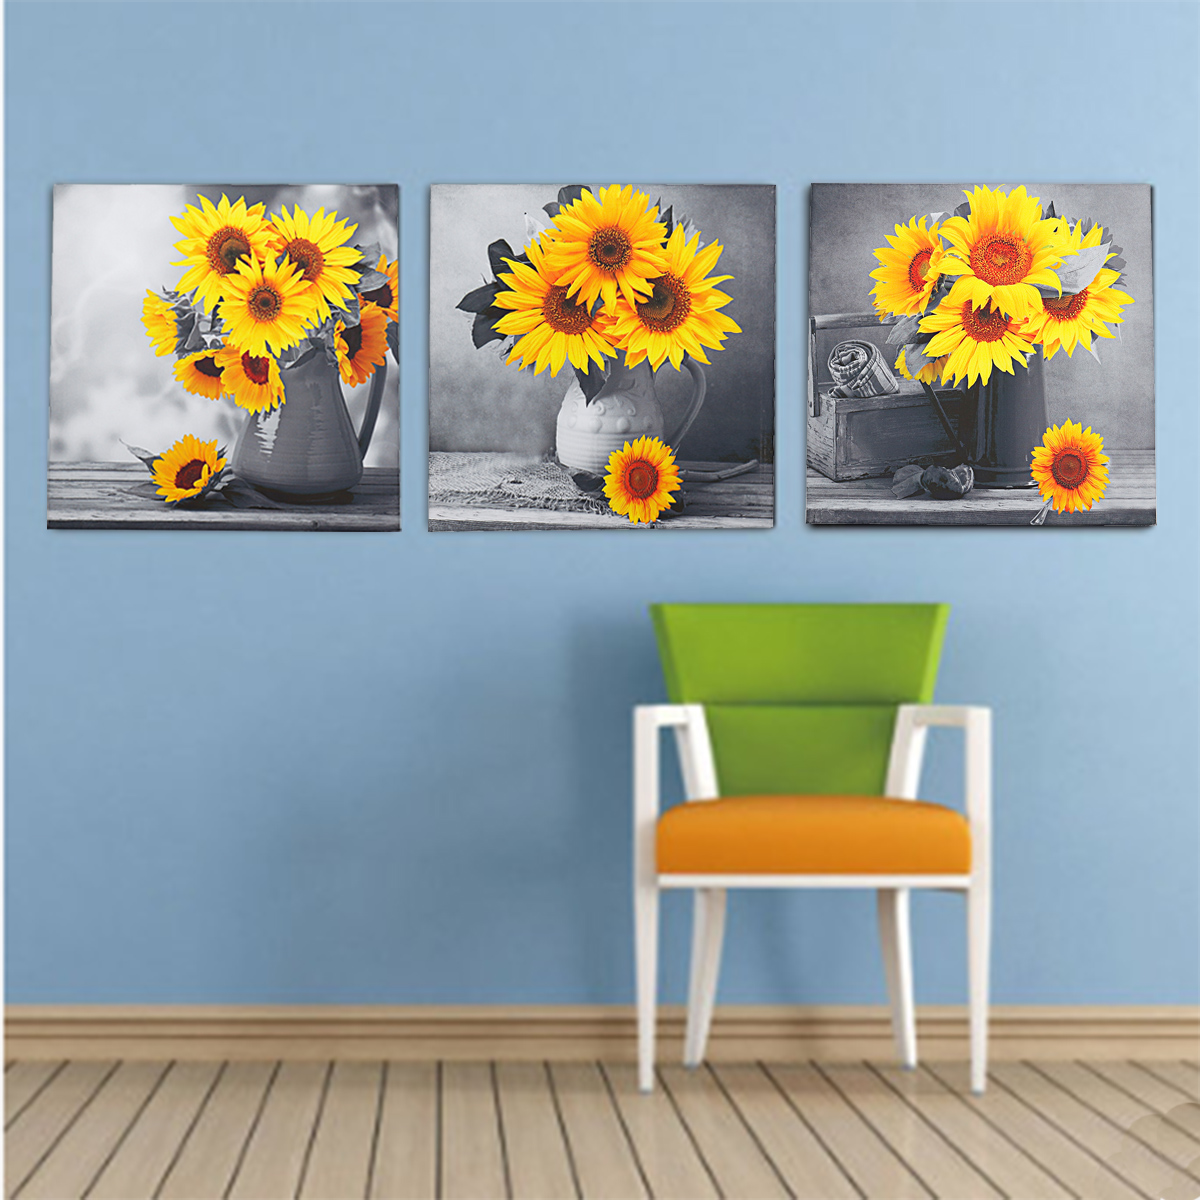 30303-cm-Sunflower-Wall-Art-Painting-Living-Room-Bedroom-Hanging-Canvas-Pictures-Office-Mural-Decora-1791798-10